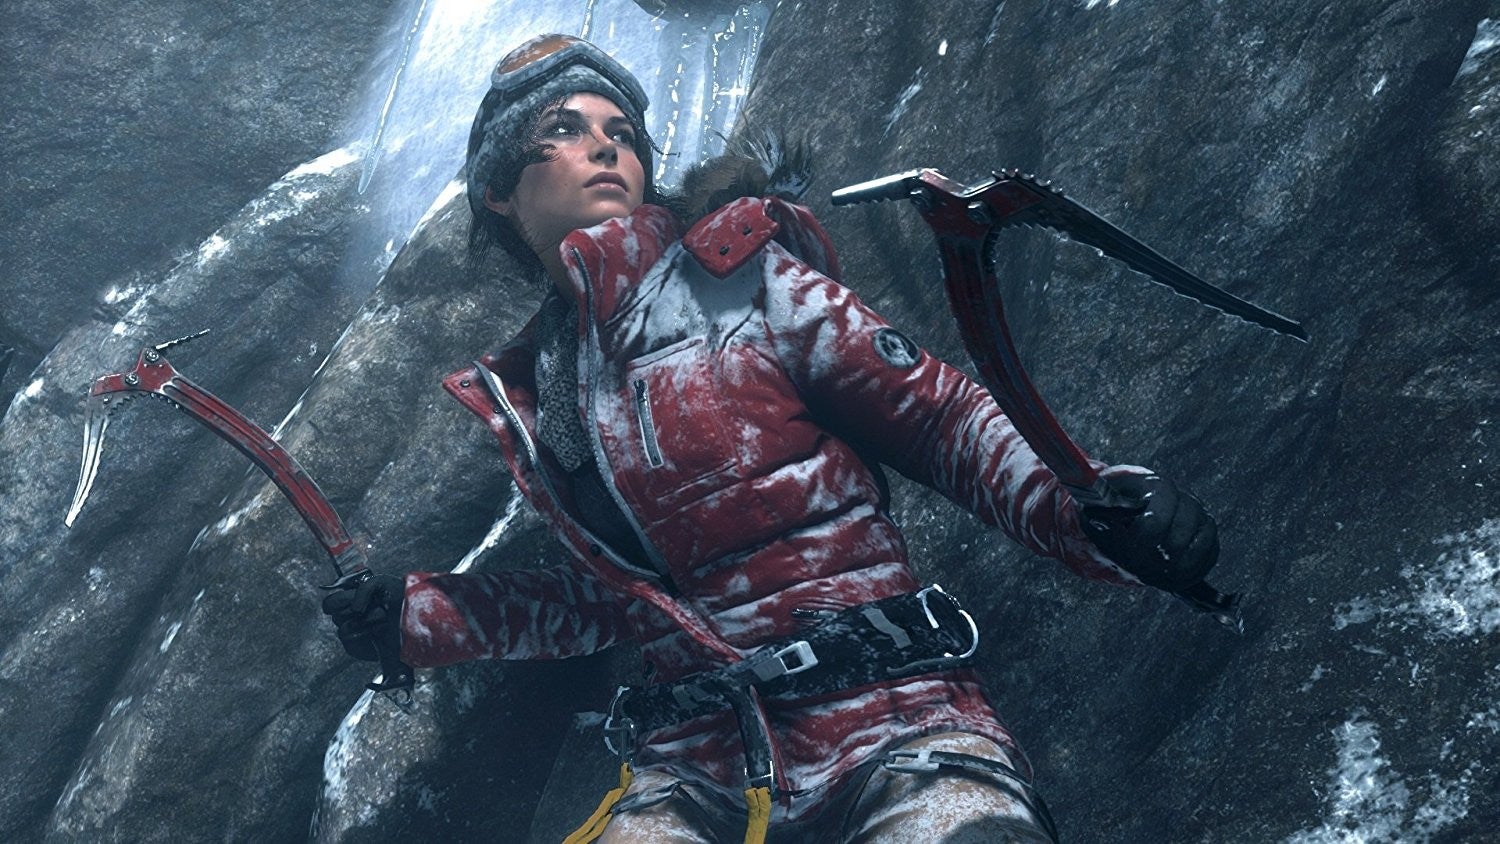 Tomb Raider film and TV series reportedly in the works at Amazon